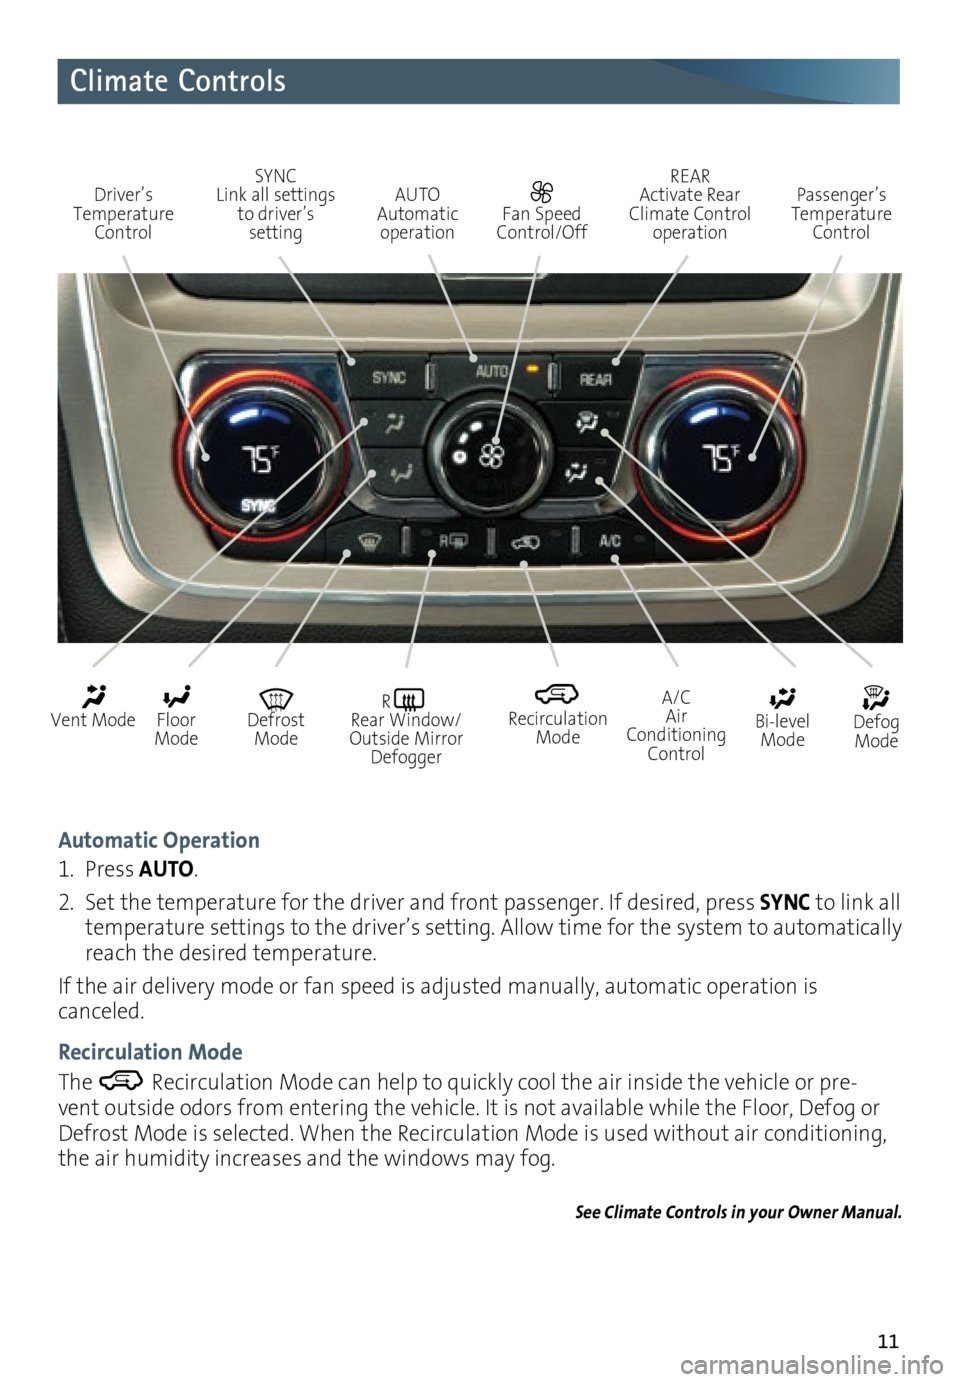 GMC ACADIA 2016  Get To Know Guide 11
Climate Controls
Automatic Operation
1. Press AUTO.
2.  Set the temperature for the driver and front passenger. If desired, press SYNC to link all 
temperature settings to the driver’s setting. A